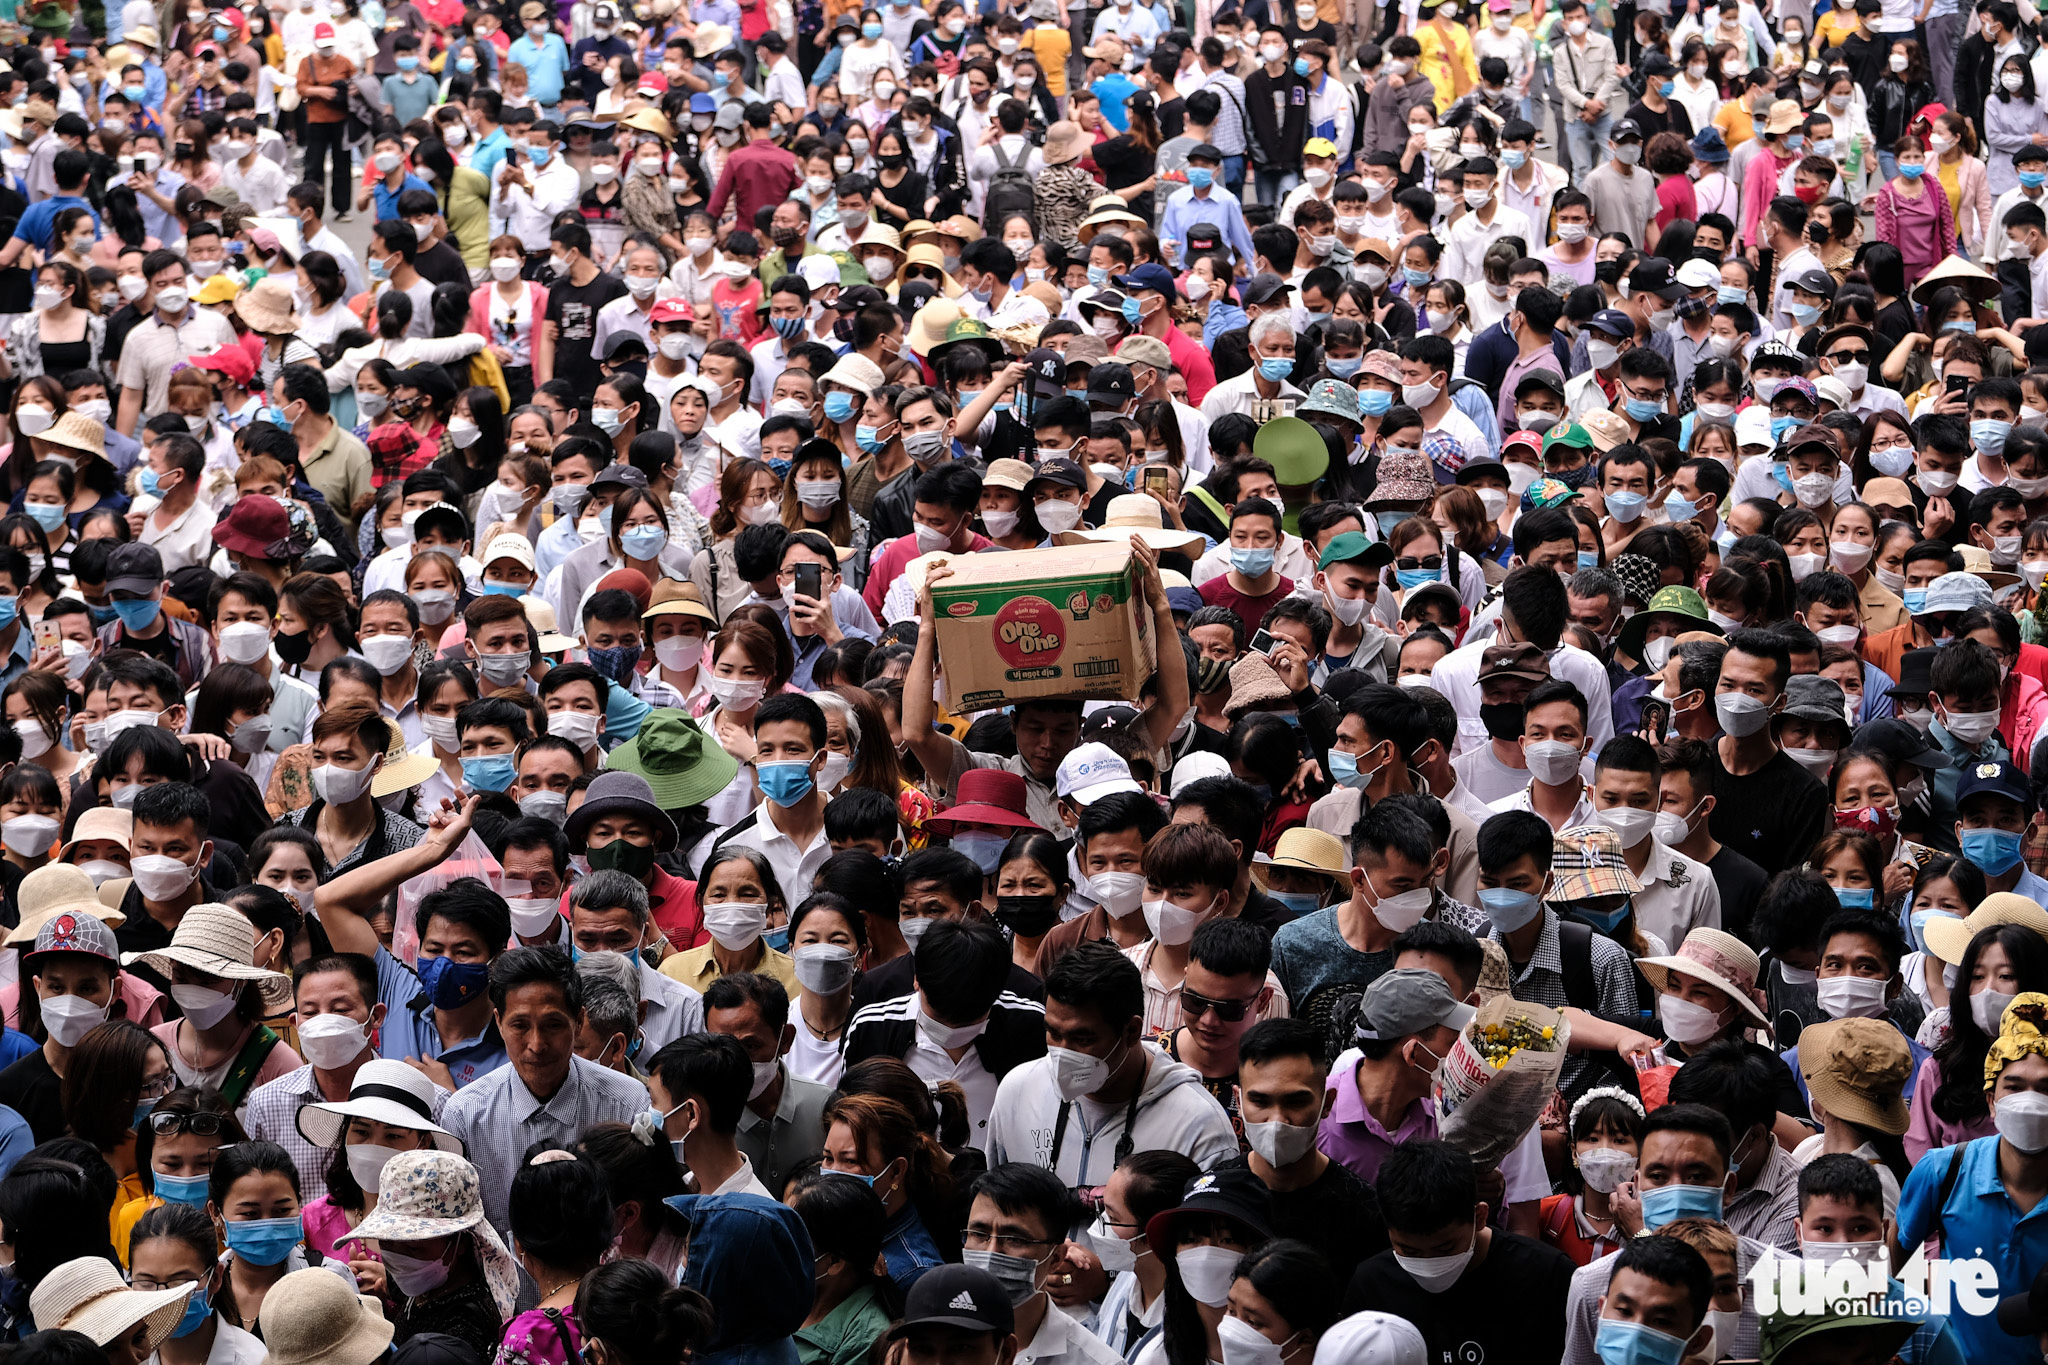 A sea of people at the Hung King Temples in Phu Tho Province, Vietnam, April 10, 2022. Photo: Nam Tran / Tuoi Tre